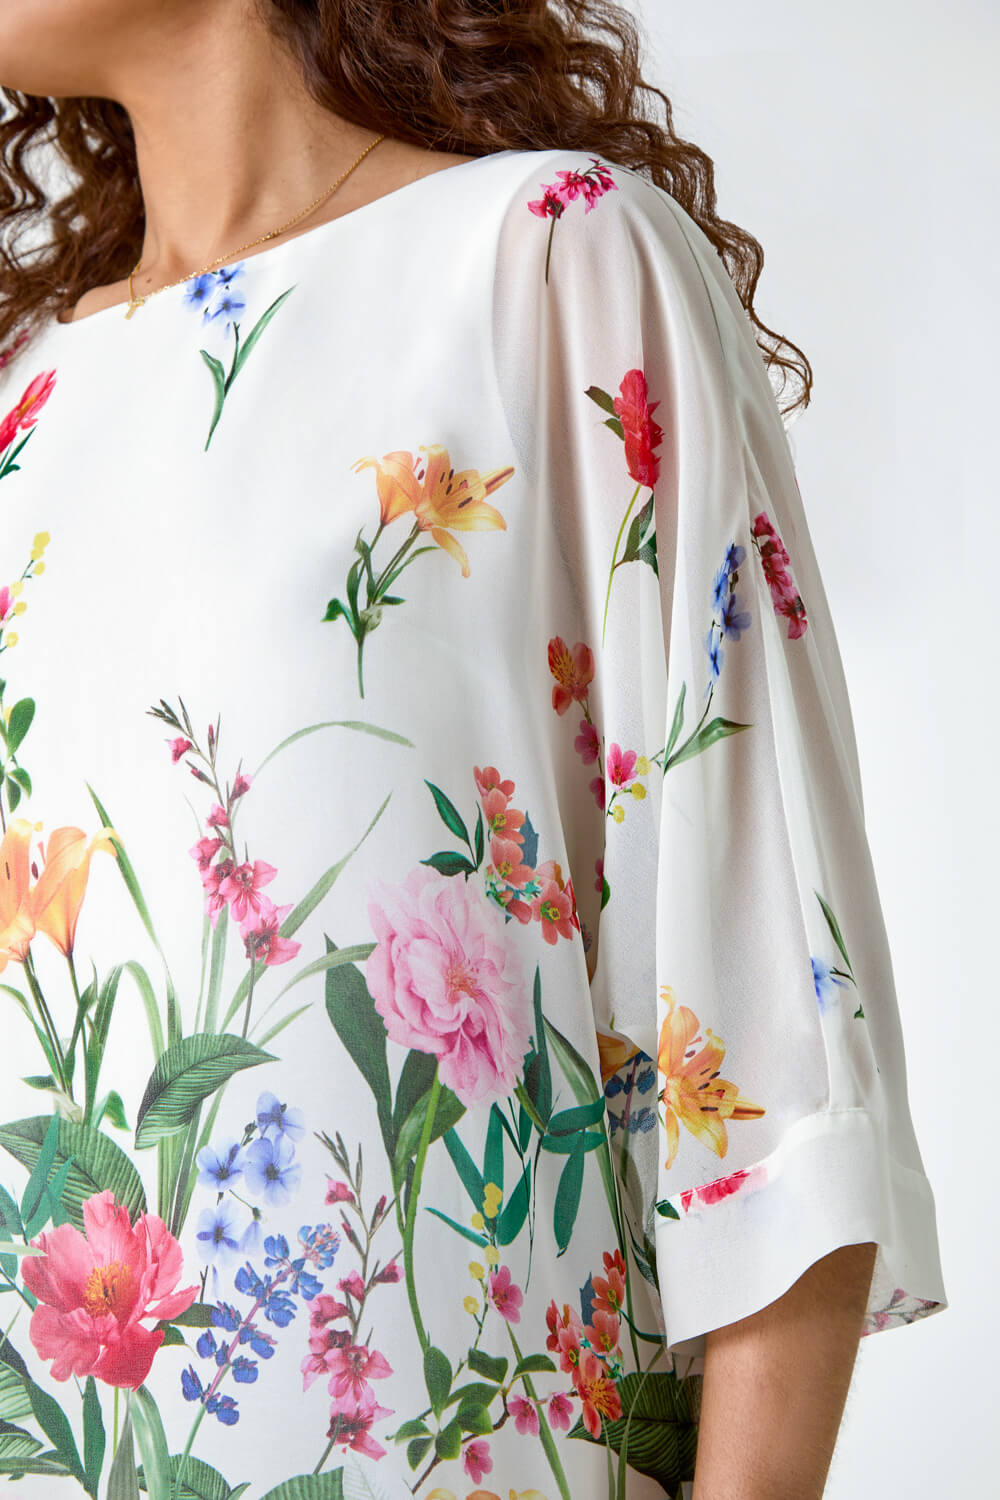 Ivory  Floral Border Print Overlay Top, Image 5 of 5